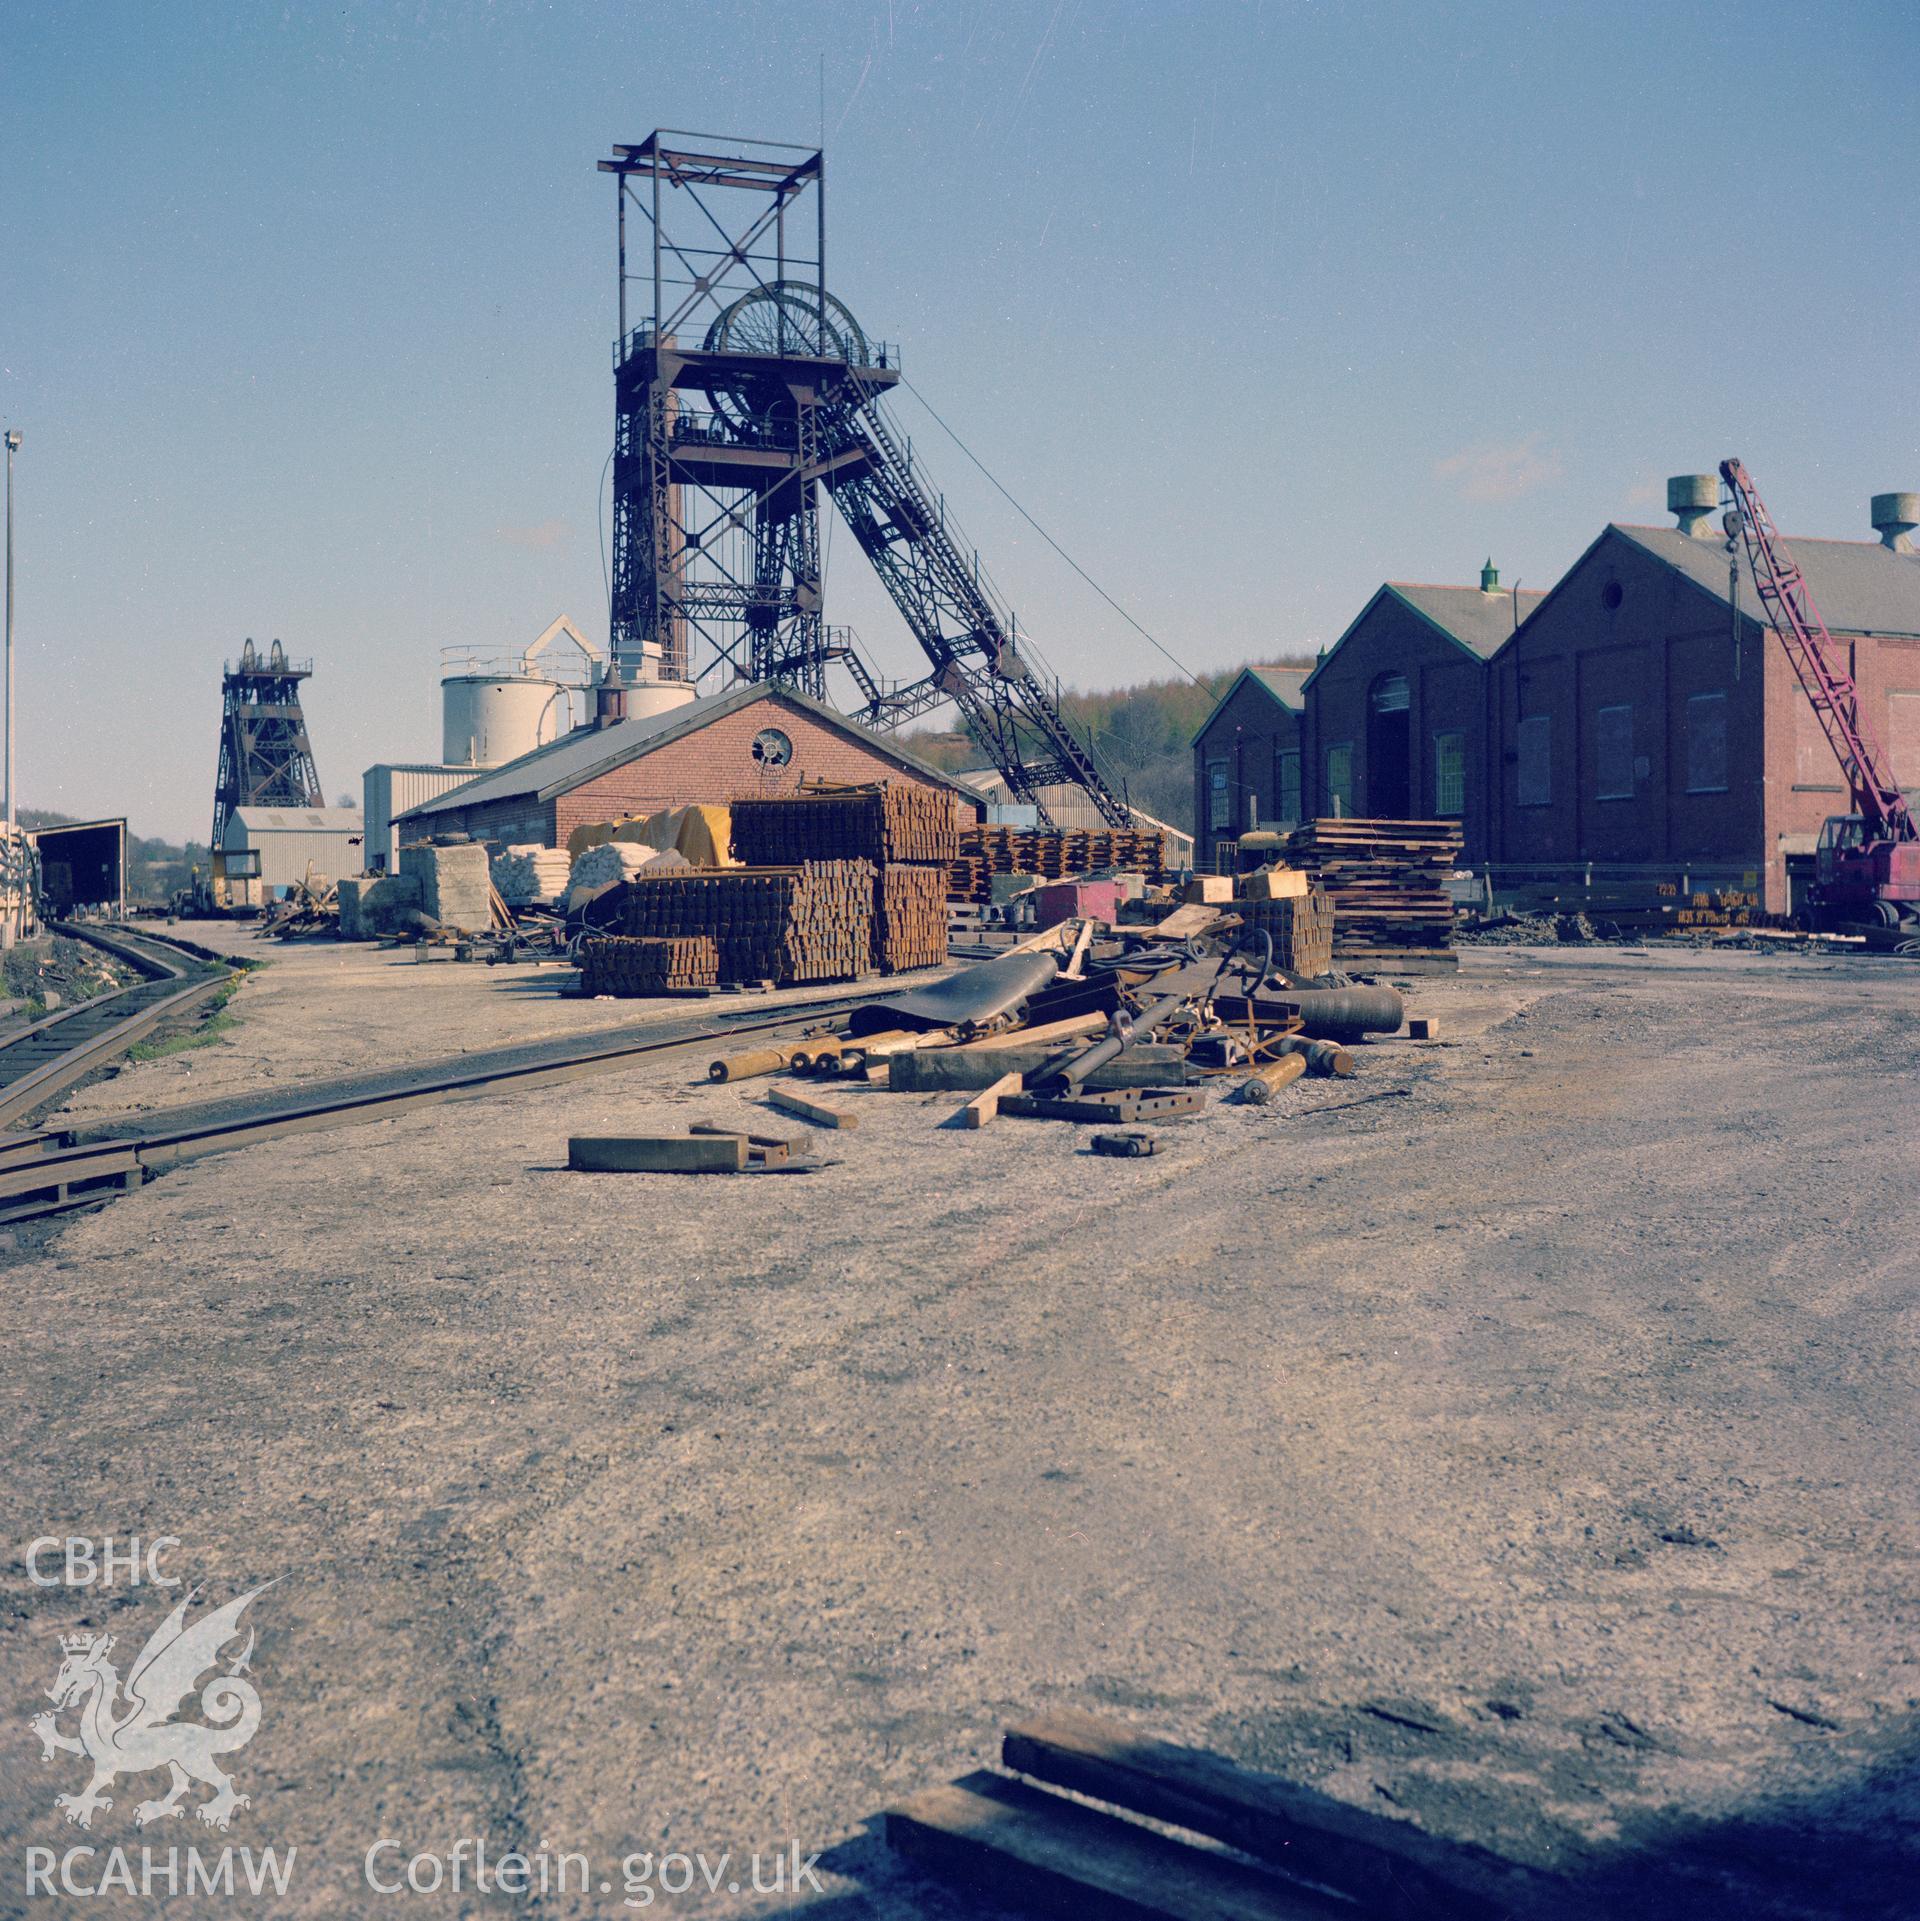 Digital copy of an acetate negative showing headframe at Cefncoed Colliery from the John Cornwell Collection.